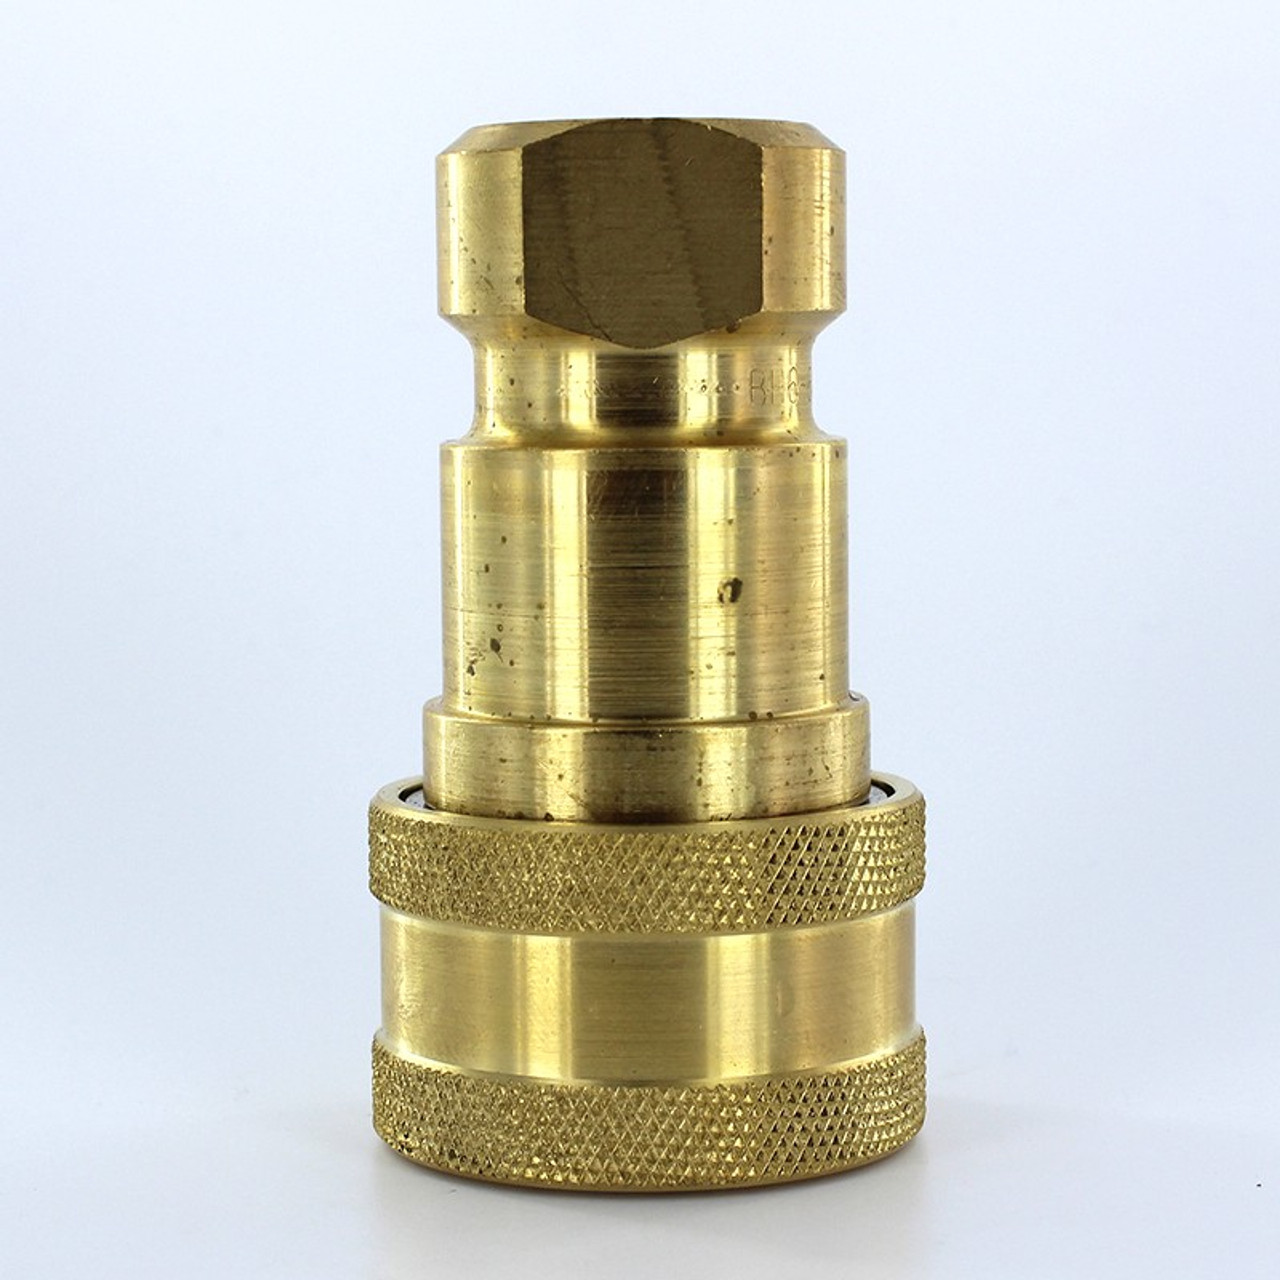 Parker Bh6-60 60 Series Coupler Brass 3/4" Body Size 3/4" Npt Female Port Poppet-Type Valve General Purpose 27.4" Hg Vacuum-1000Psi (69Bar) Wp Nitrile Seals Temp Range Degrees F: (-40 To +250) Conforms To Iso 7241 Series B Standards